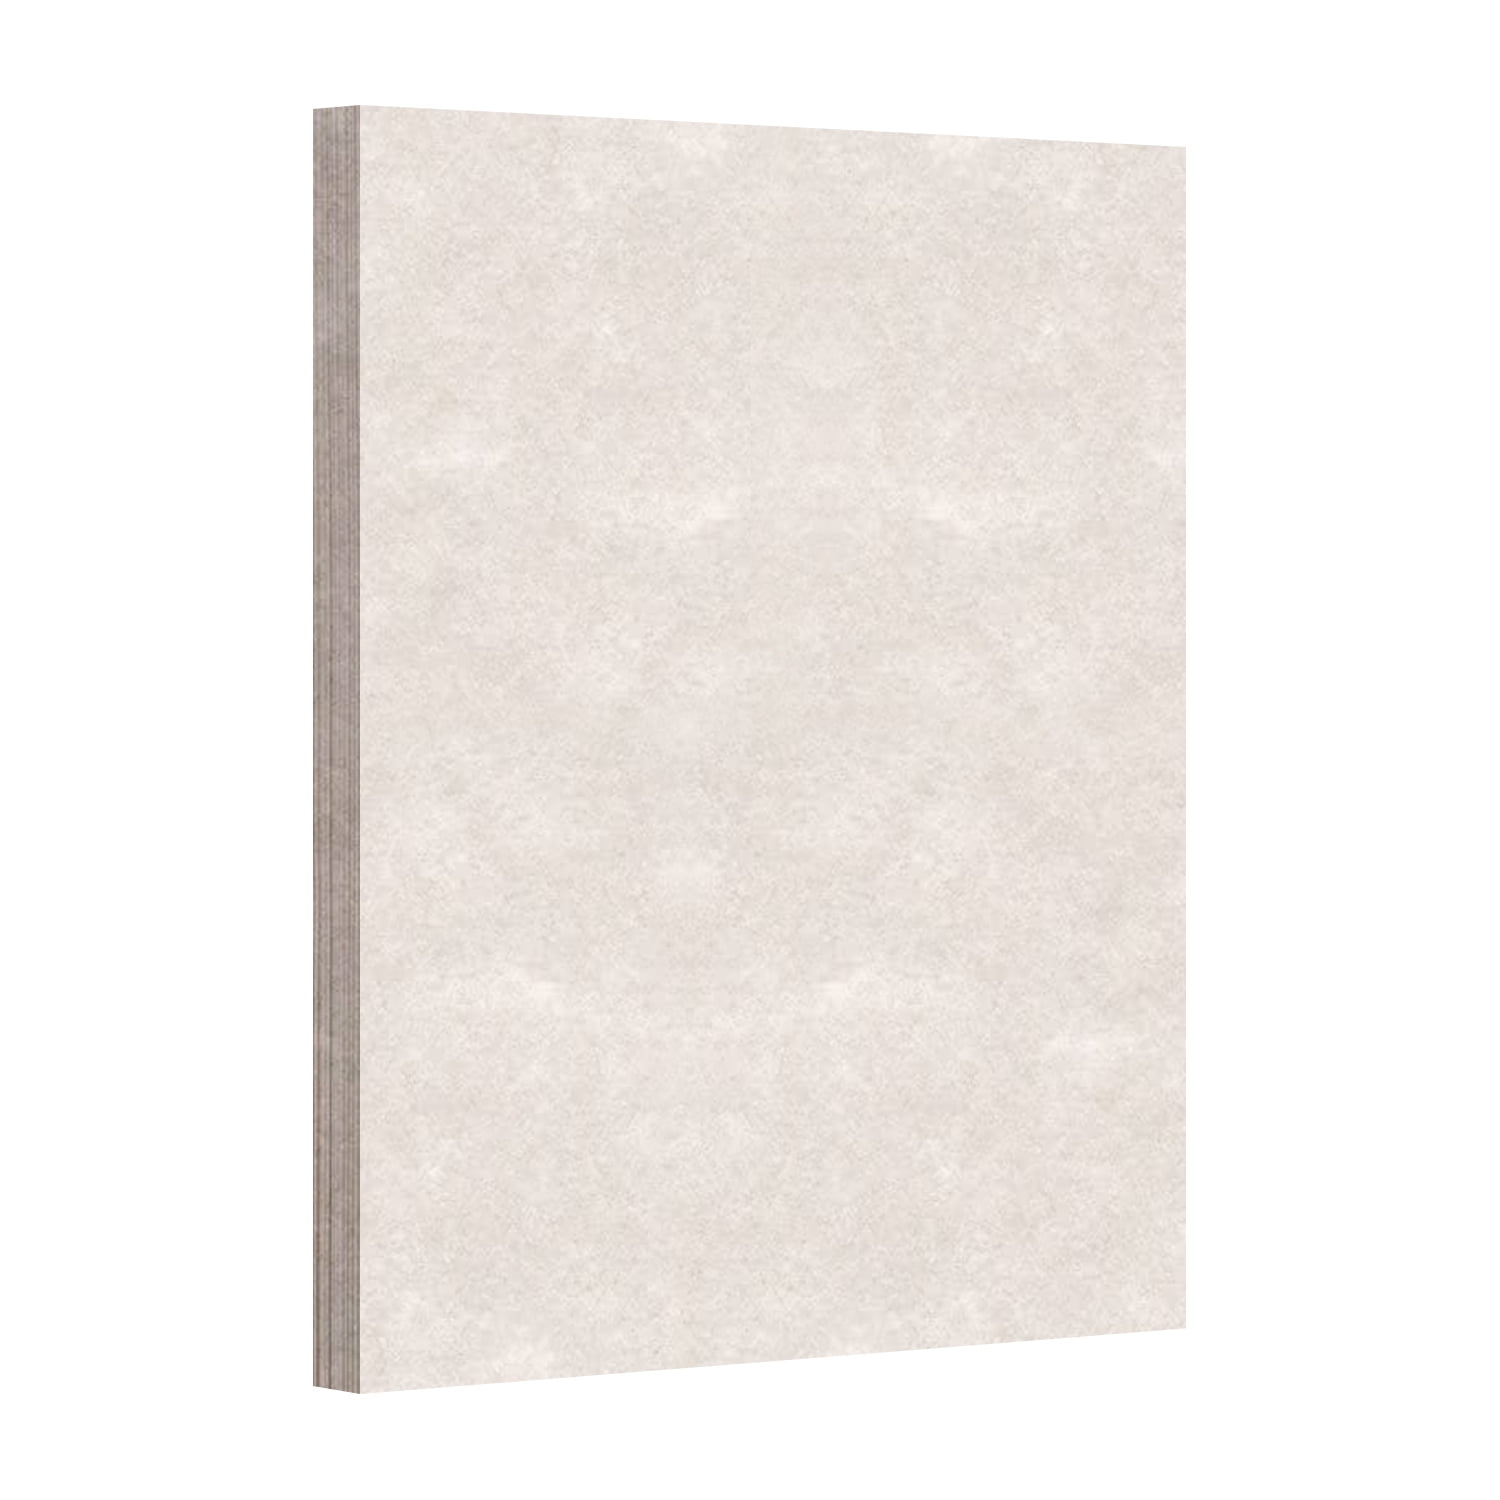 New White Parchment Paper – Great for Certificates, Menus and Wedding  Invitations, 24lb Bond, 60lb Text (90gsm), 8.5 x 11”